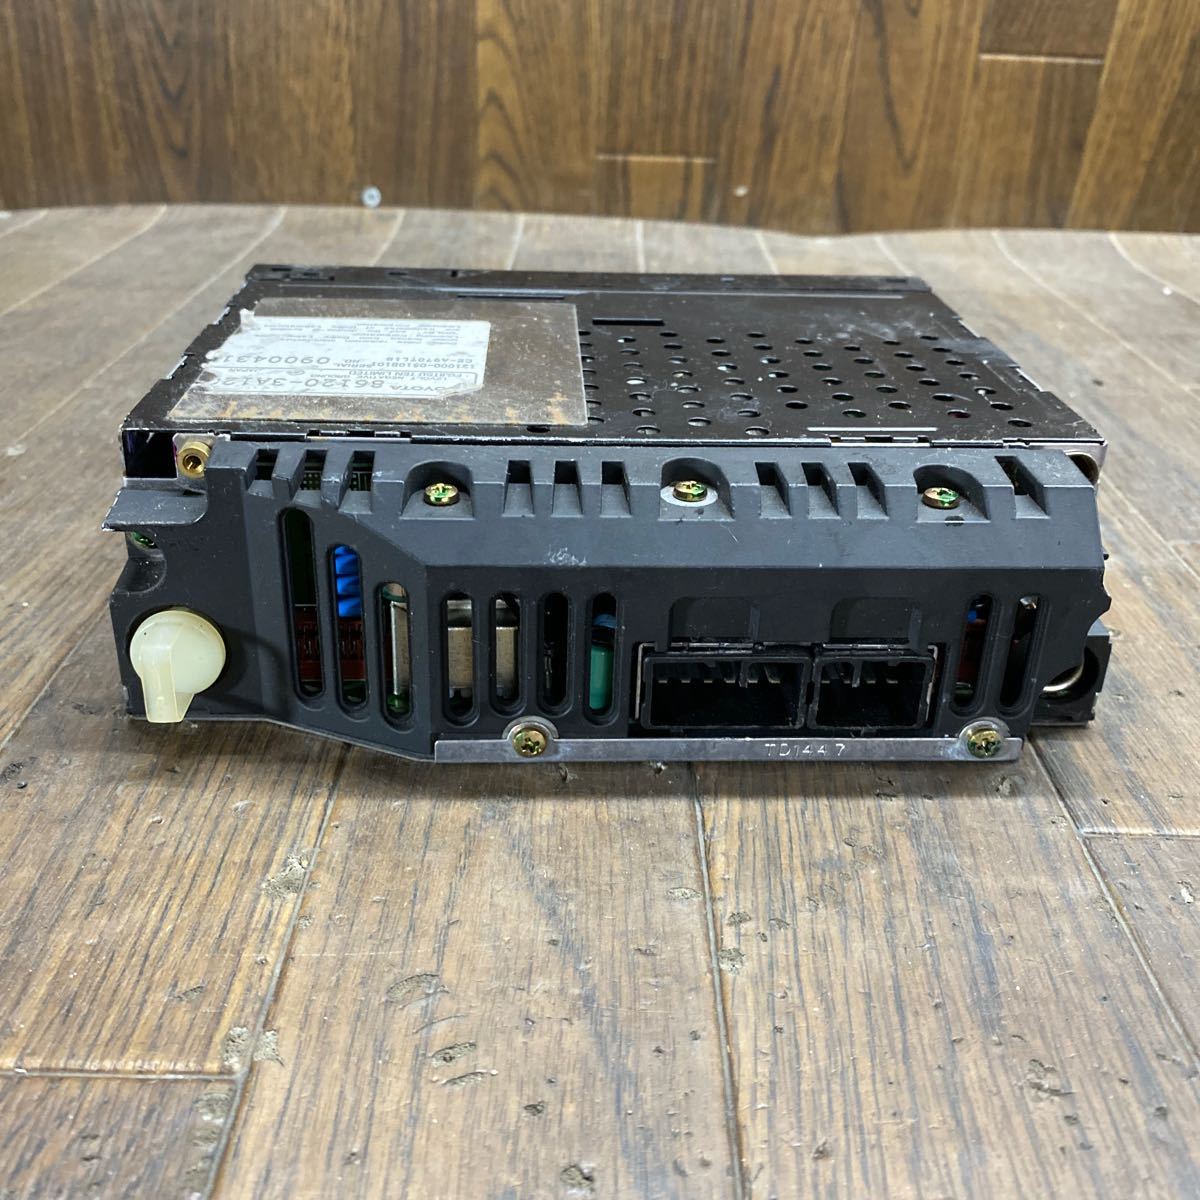 AV2-142 super-discount car stereo tape deck TOYOTA 86120-3A120 121000-0510B101 CE-A970T1B cassette body only simple operation verification ending used present condition goods 